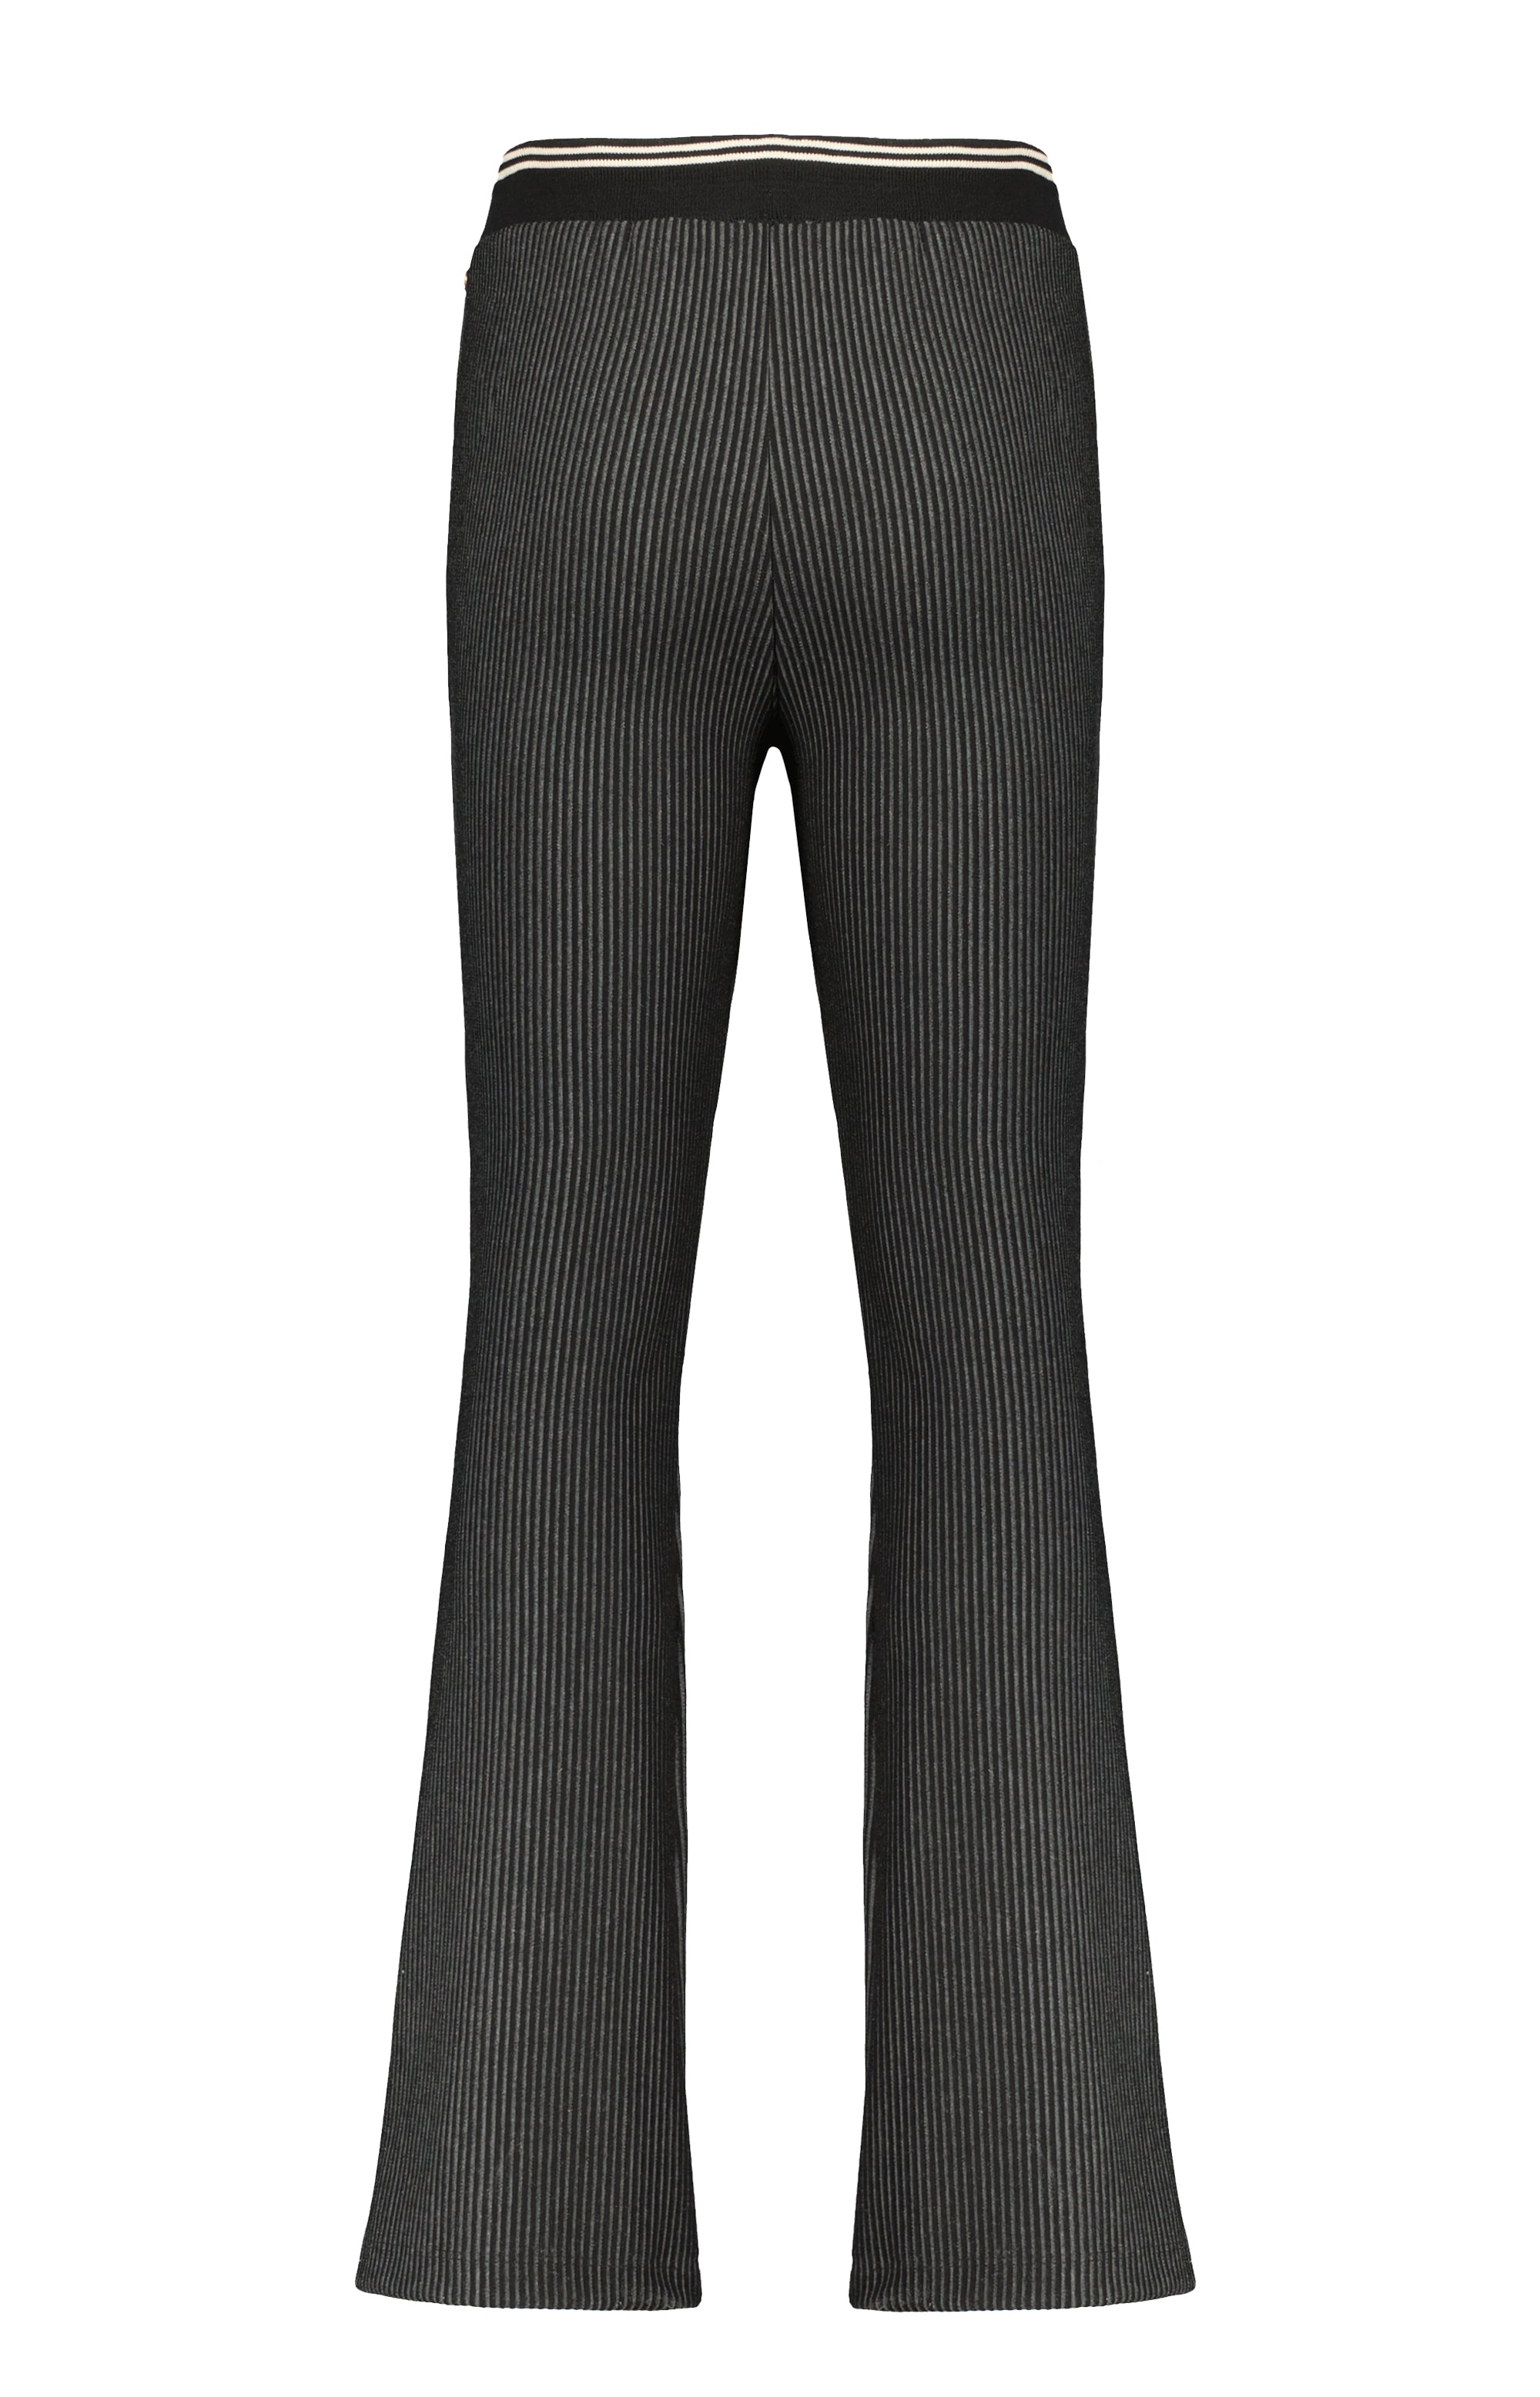 NoBell Sadia striped flared pants with ribbed waistband